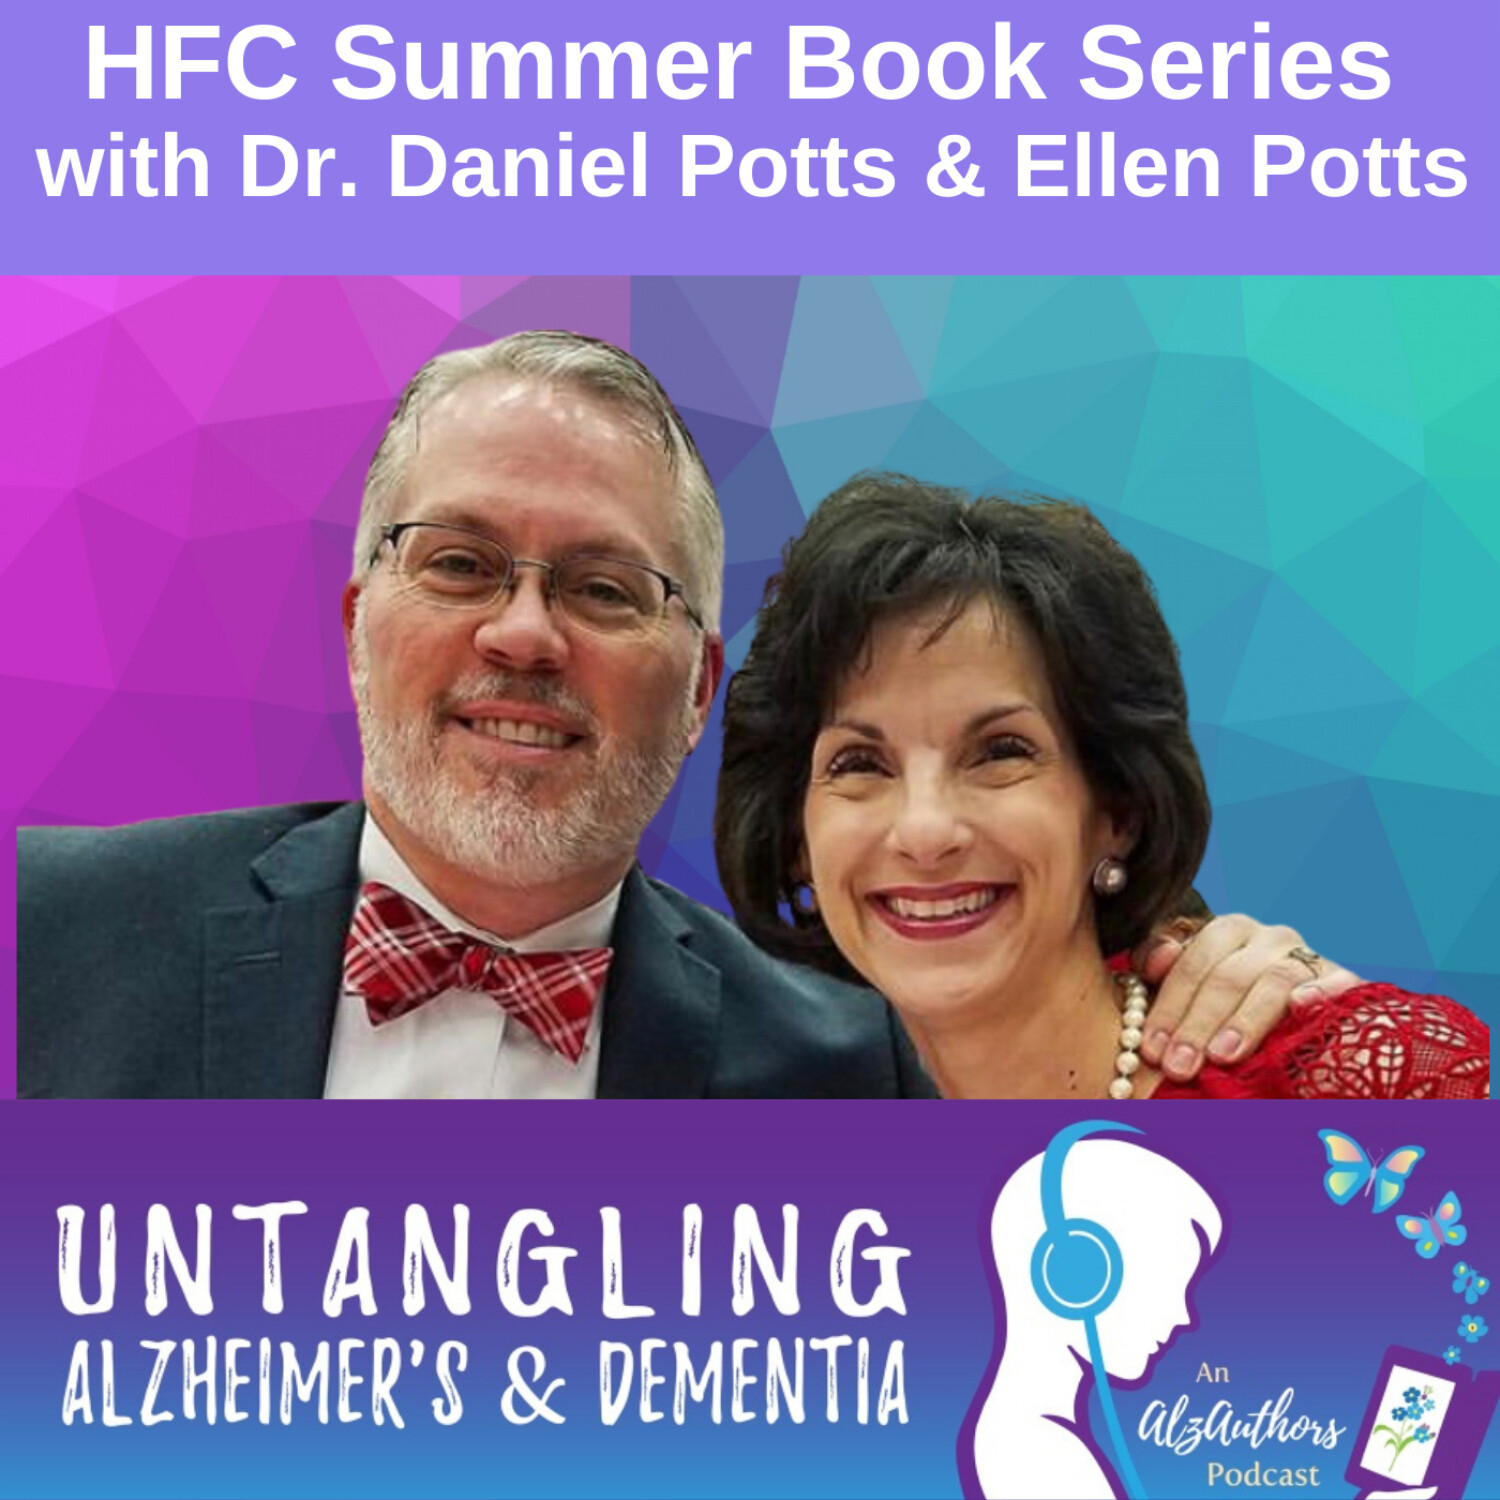 HFC and AlzAuthors Present Daniel Potts, MD, FAAN, and Ellen Potts, Authors of A Pocket Guide for the Alzheimer's Caregiver